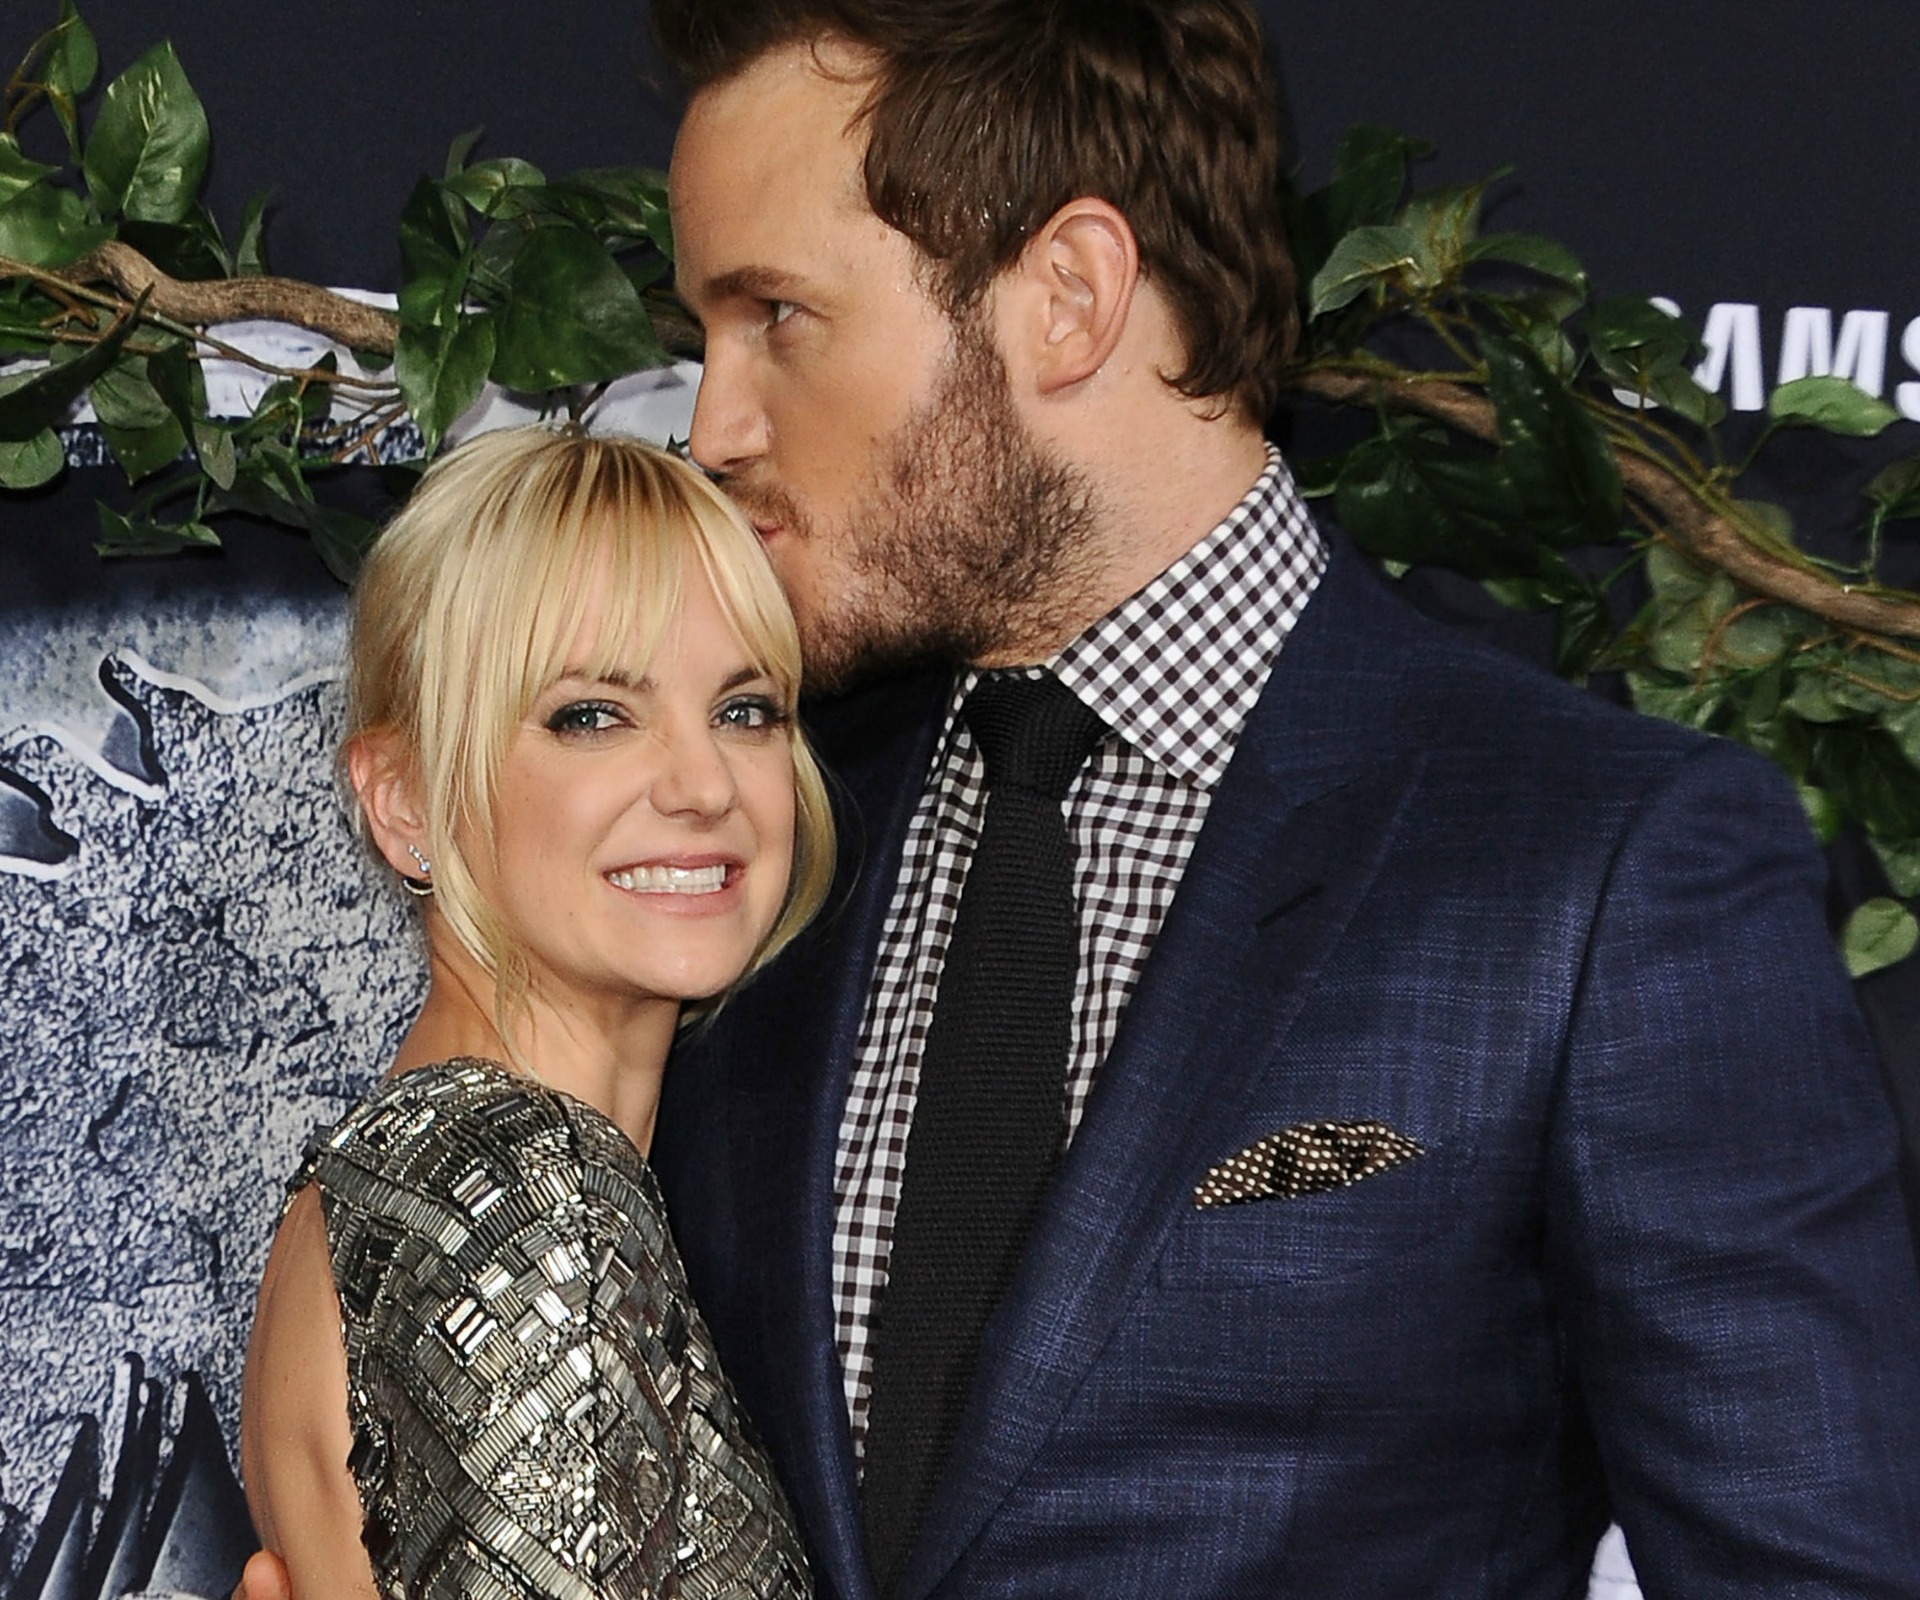 A family friend of Chris Pratt and Anna Faris’ says they’re still living together